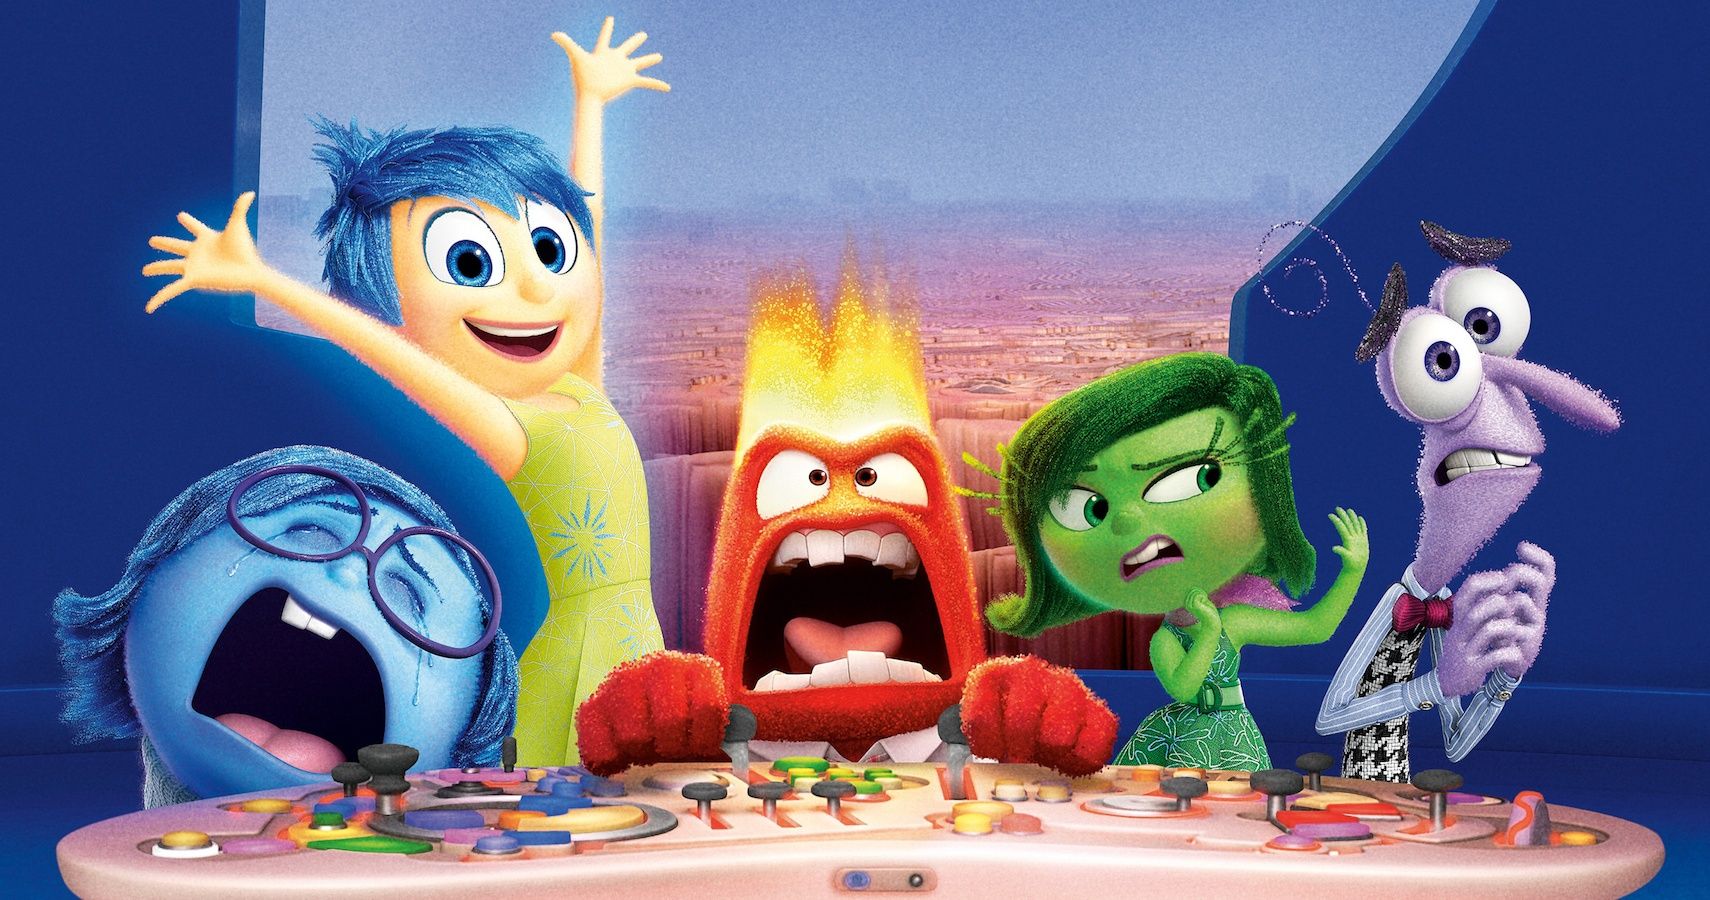 Pixar's Inside Out: 5 Of The Funniest Moments (& 5 Of The Saddest)